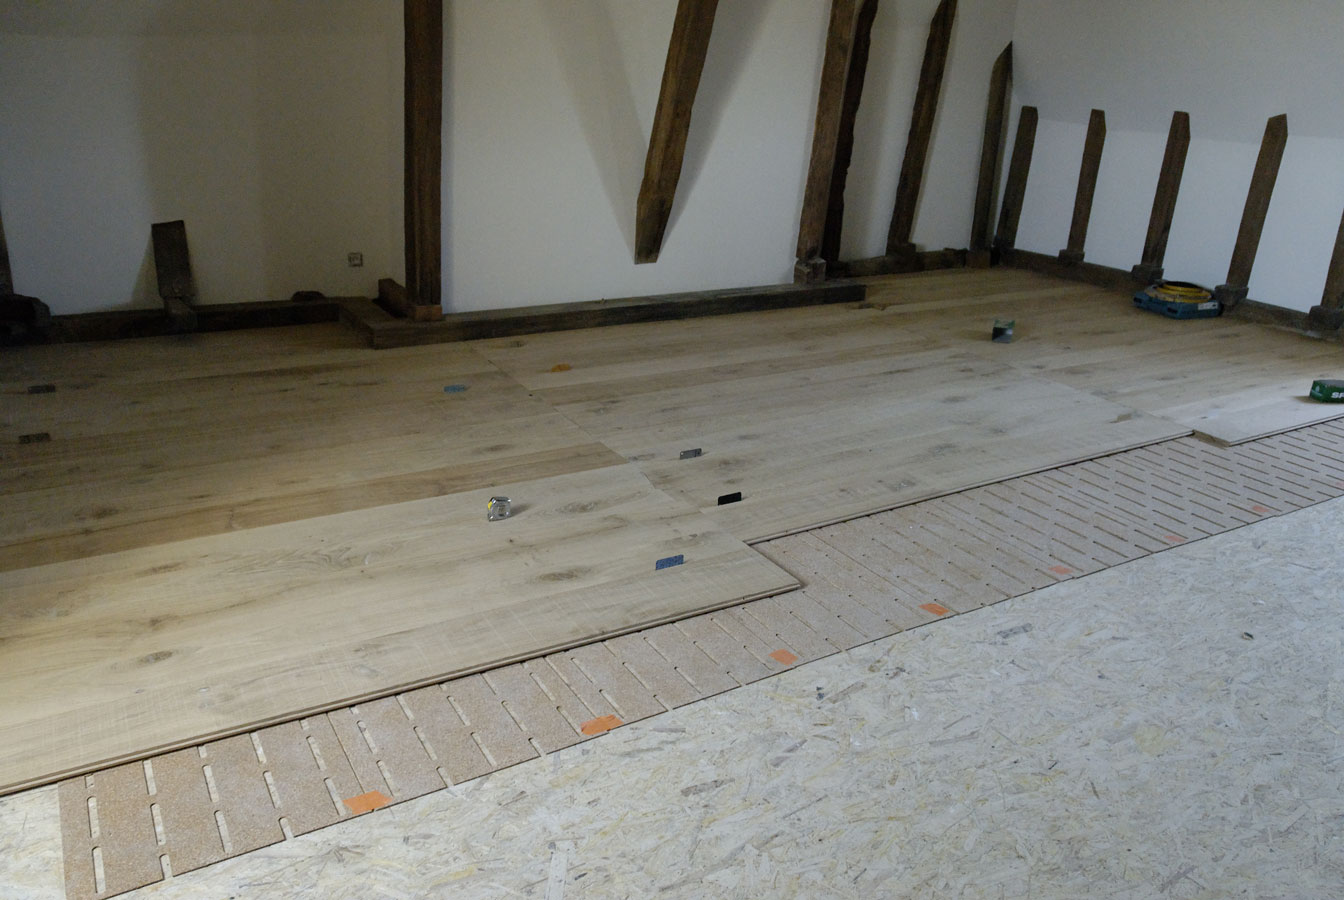 A layer of sound insulation is installed under the floor